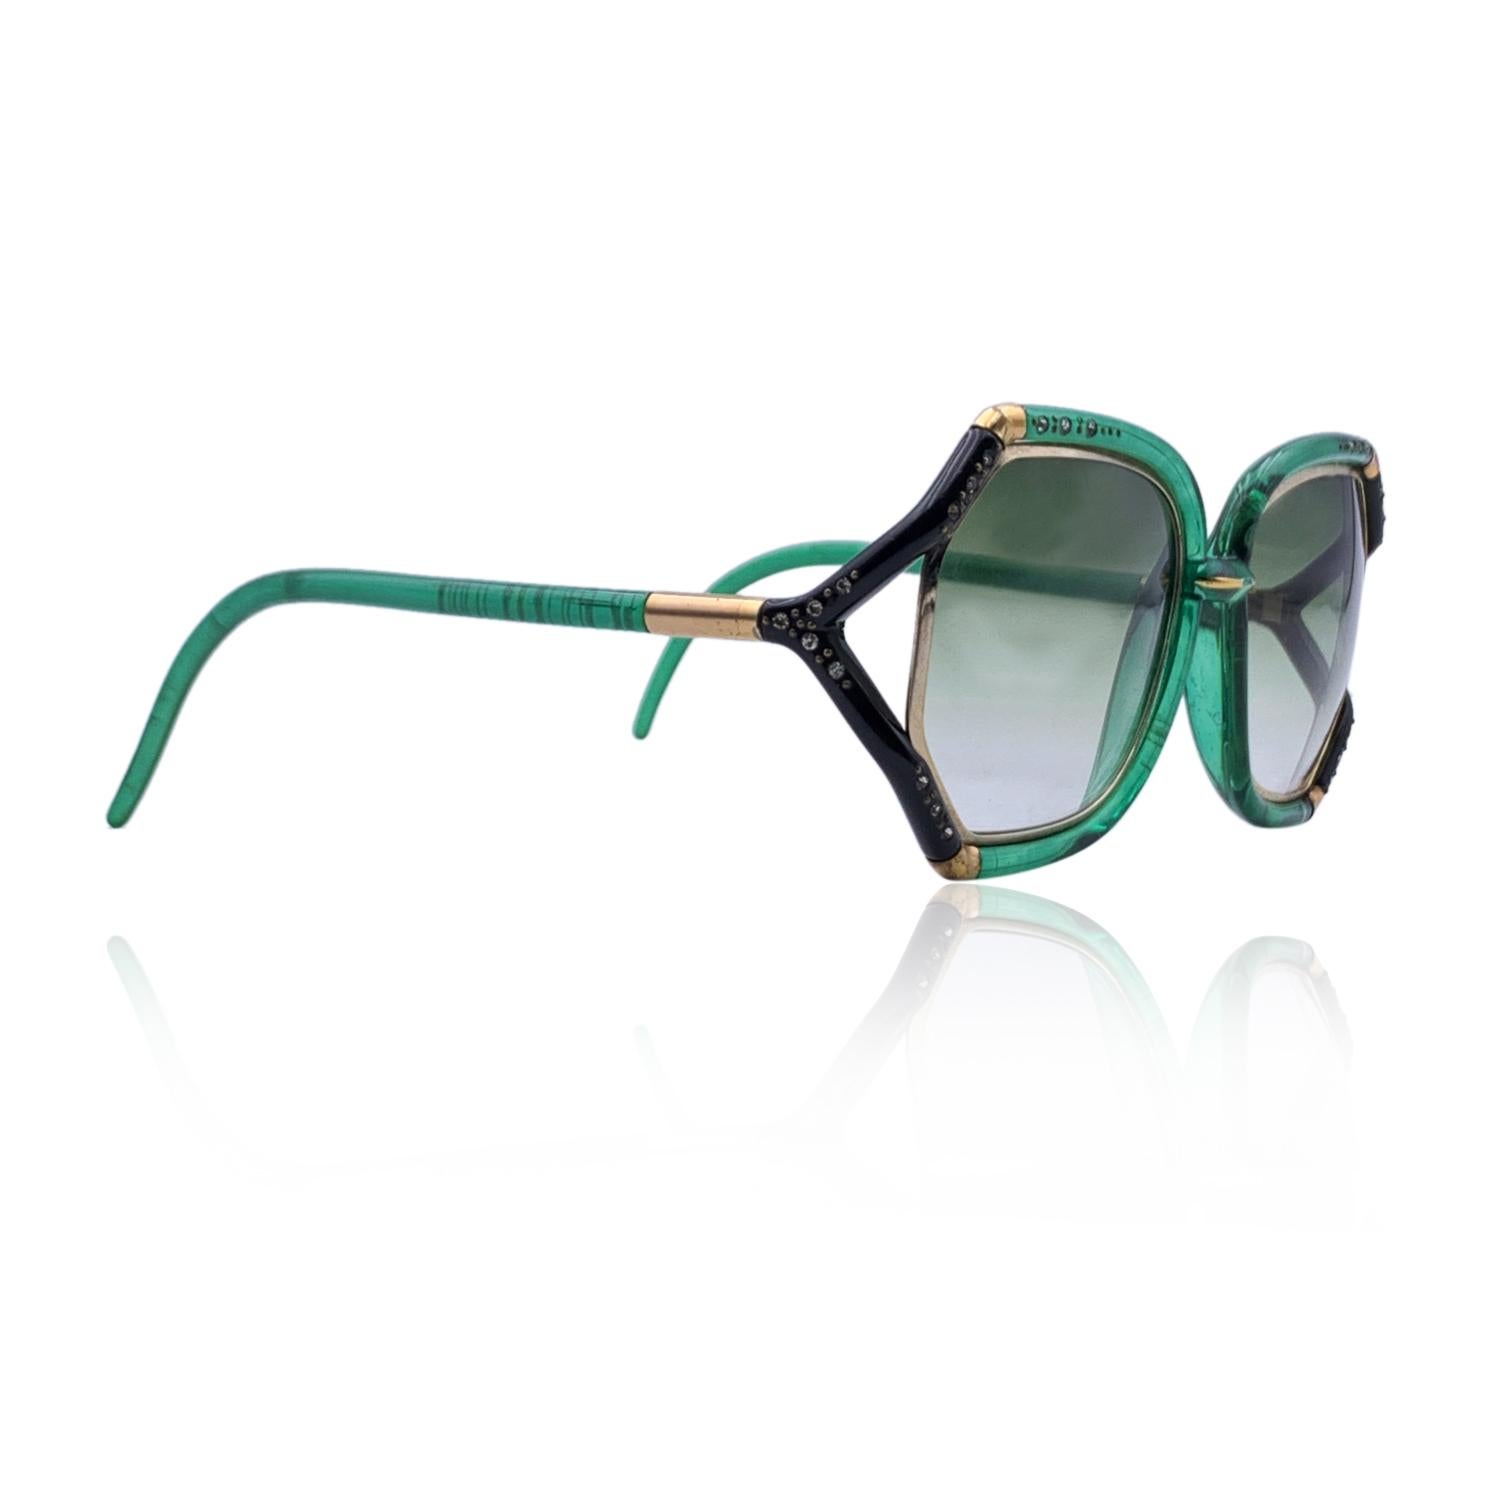 Rare vintage TED LAPIDUS oversized sunglasses mod. TL10. Made in France. Cut-out bicolor green and black frame, with gold metal finish. Crystals embellishment on the front. Green gradient lenses. 100% UV protection. The same model was worn by